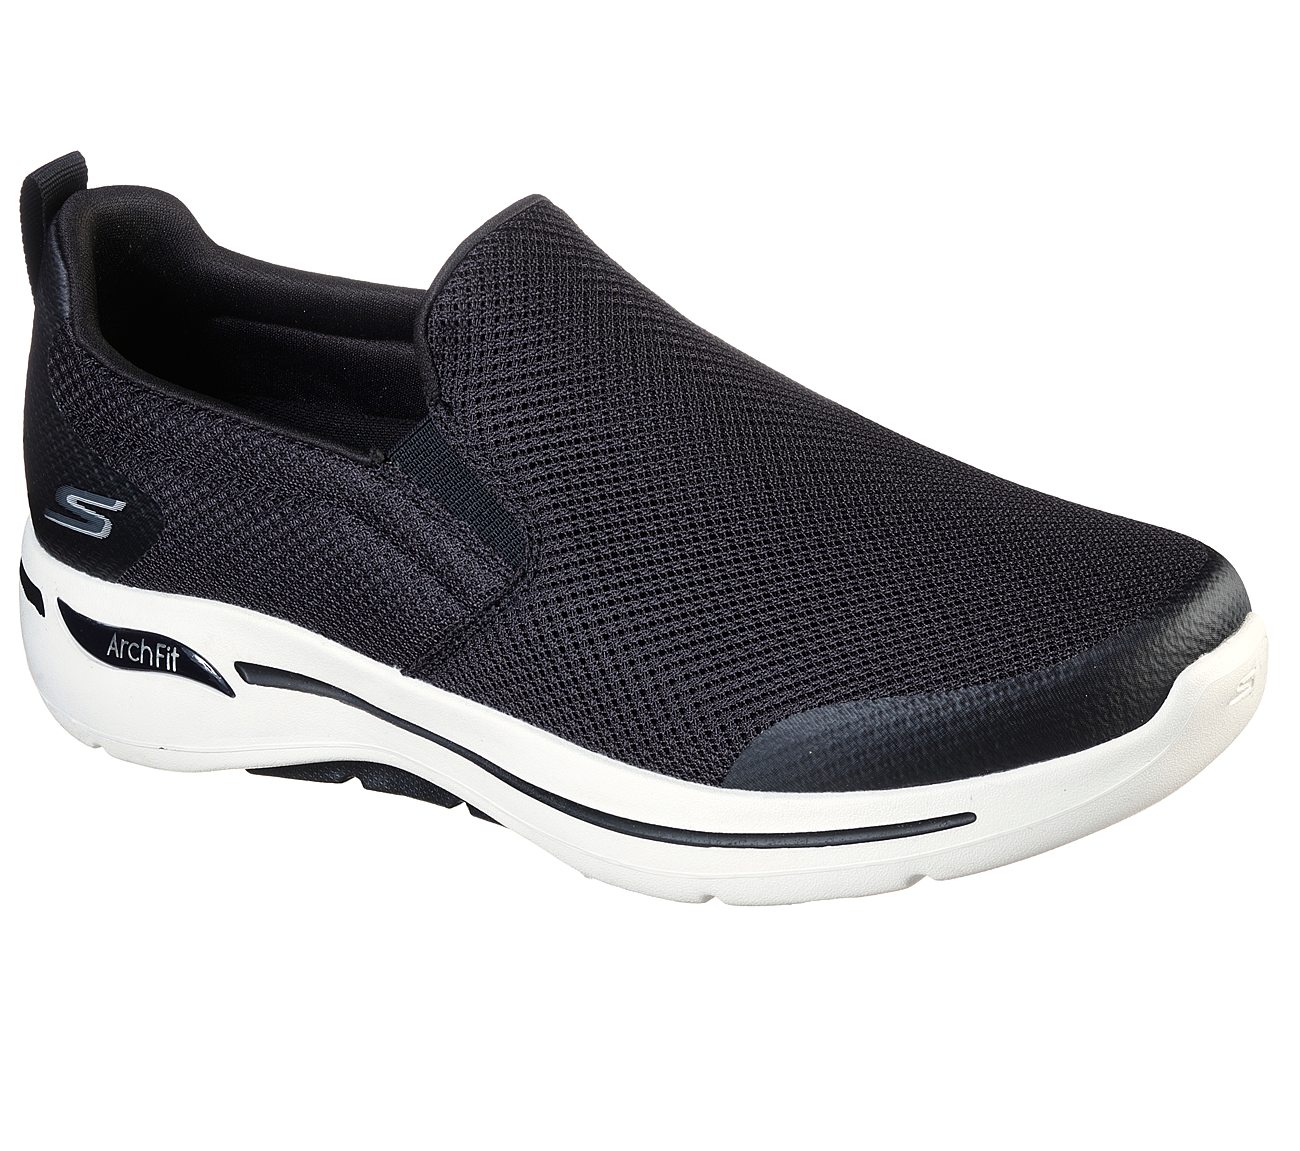 GO WALK ARCH FIT - TOGPATH, BBBBLACK Footwear Lateral View